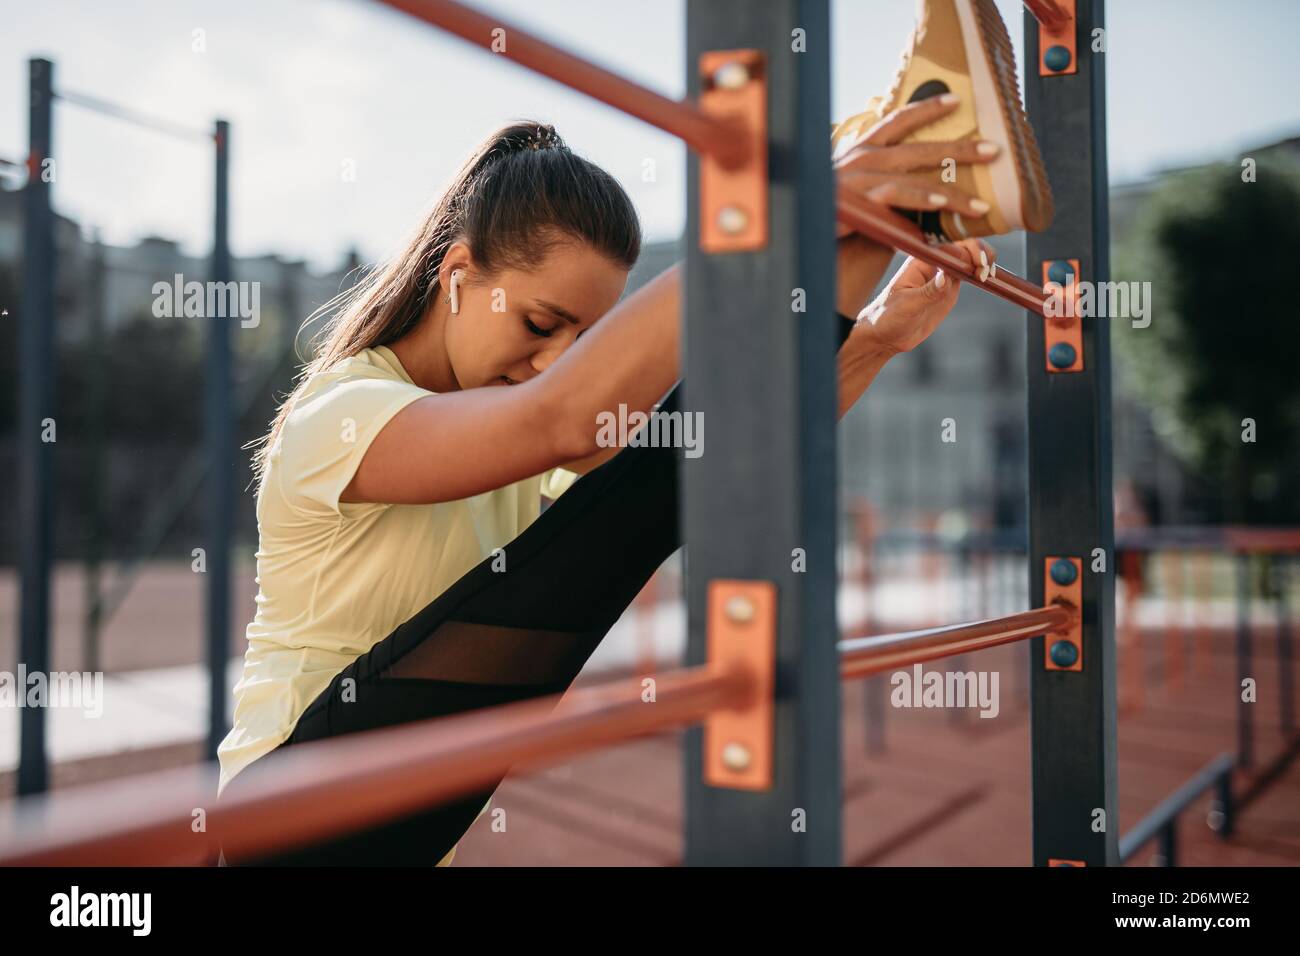 Strong young woman stretching legs near wall bar Stock Photo